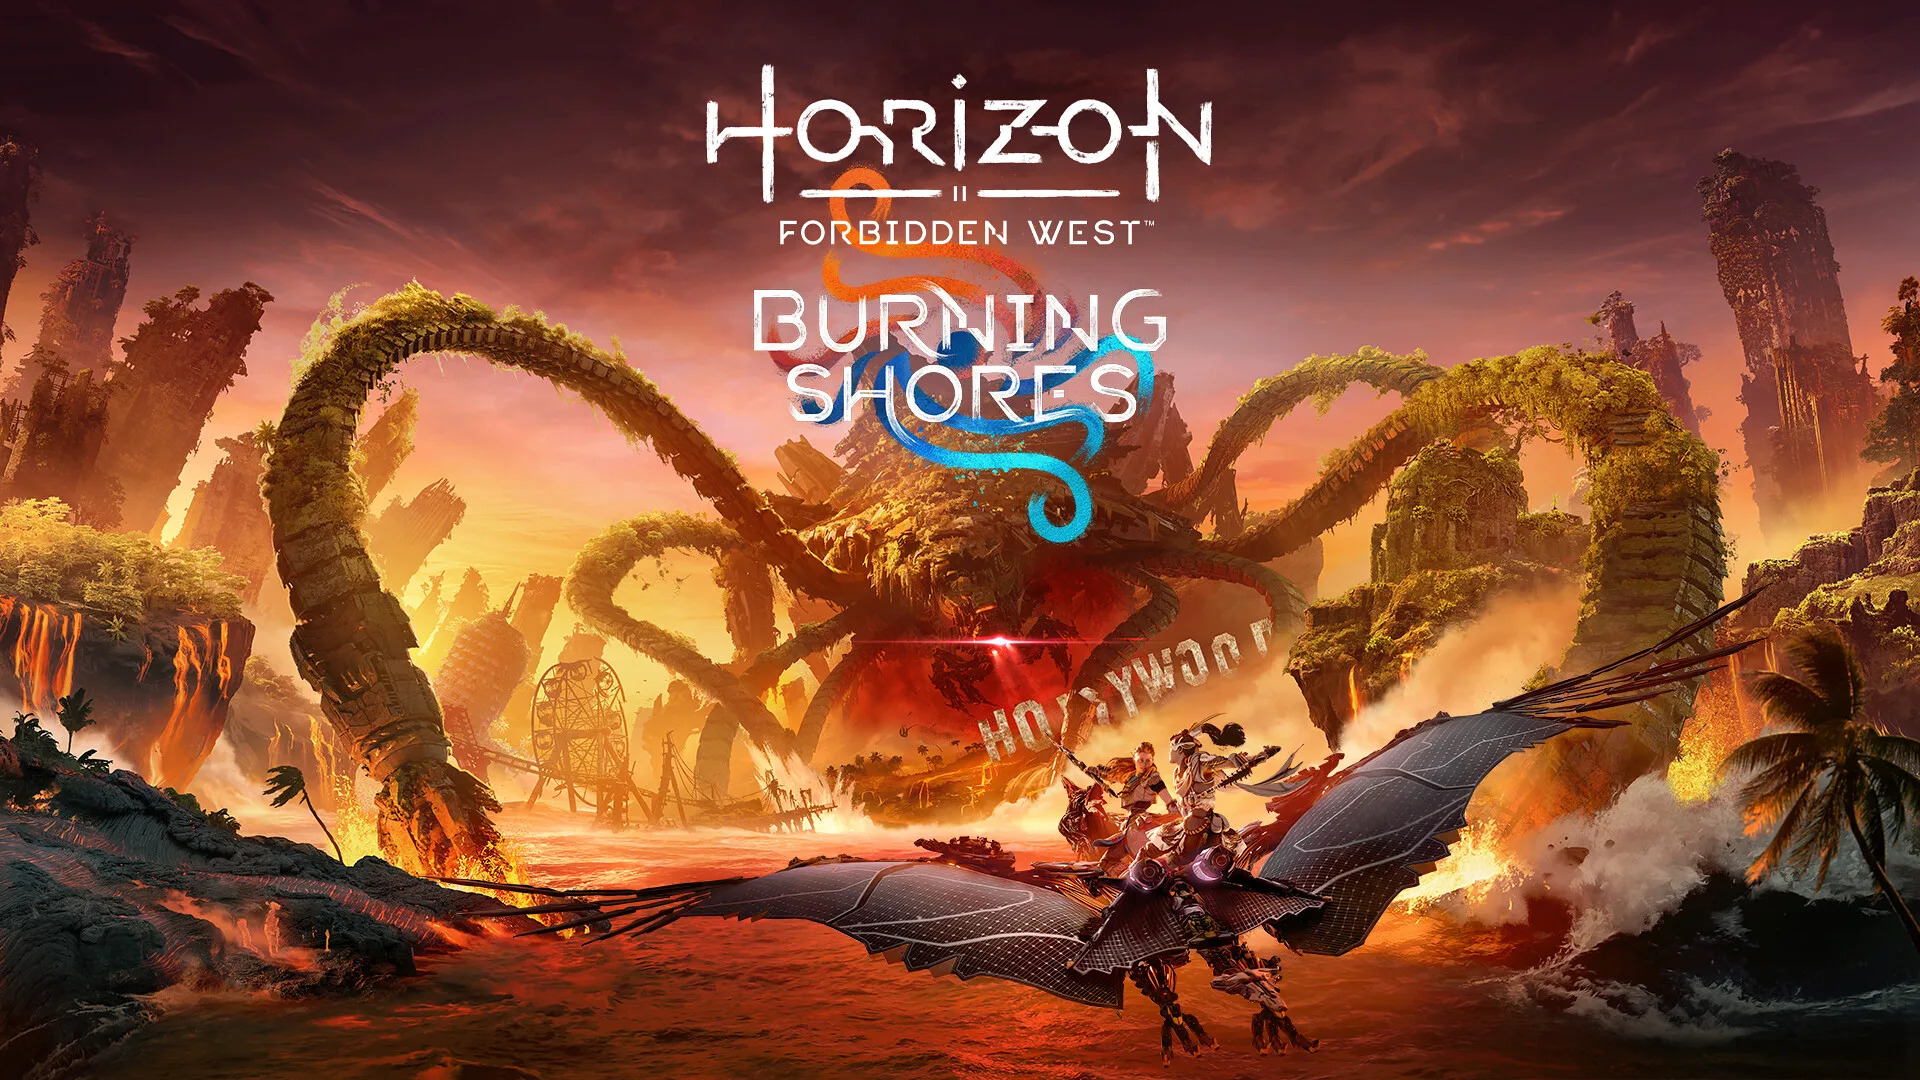 Horizon Forbidden West Download for PC- Gameplay and Story